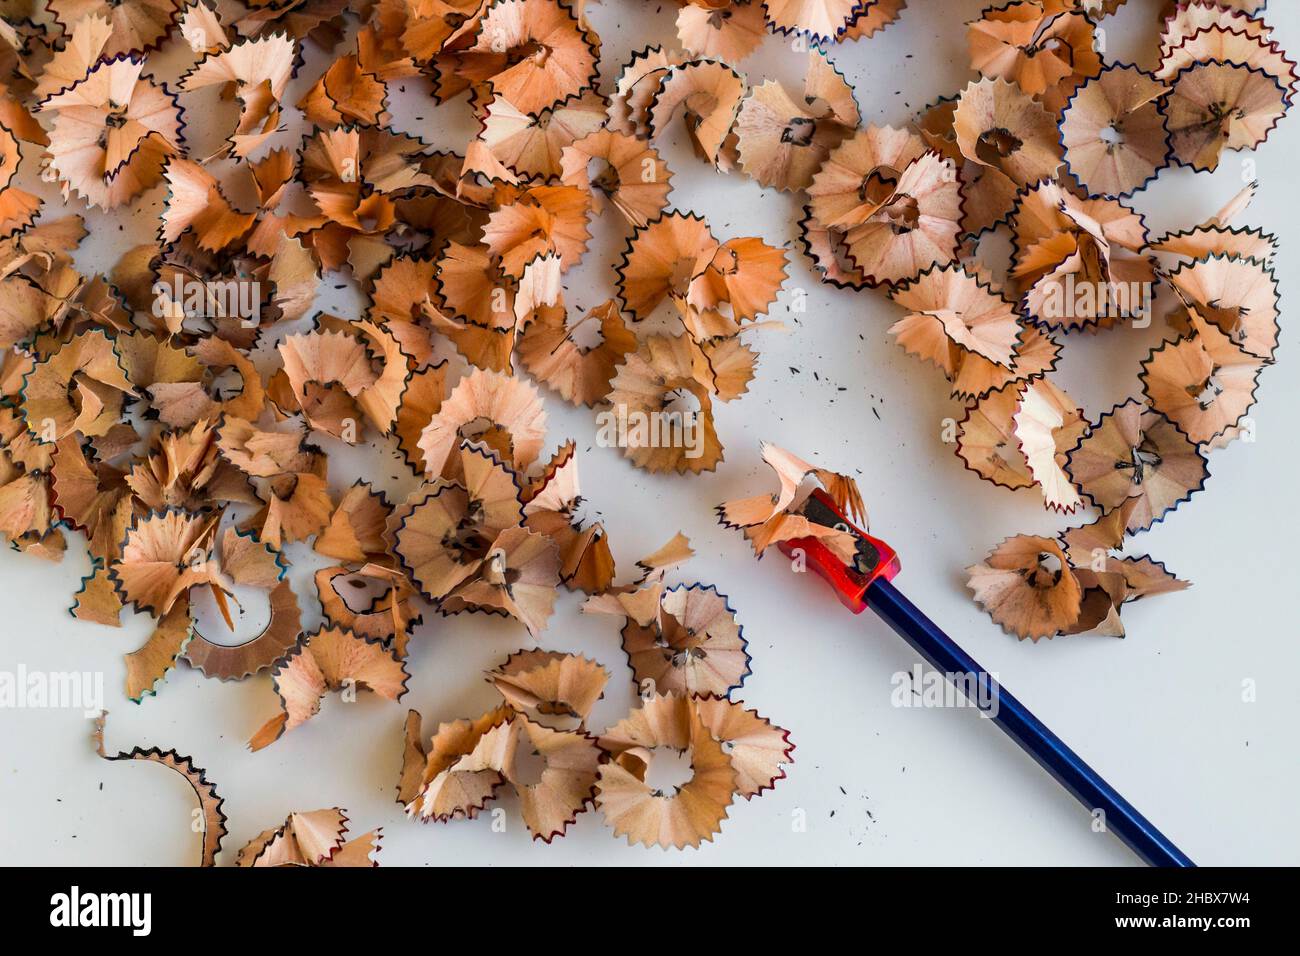 Toxic waste of lead pencils should be careful with kids and pets.Conceptual image of education. Stock Photo